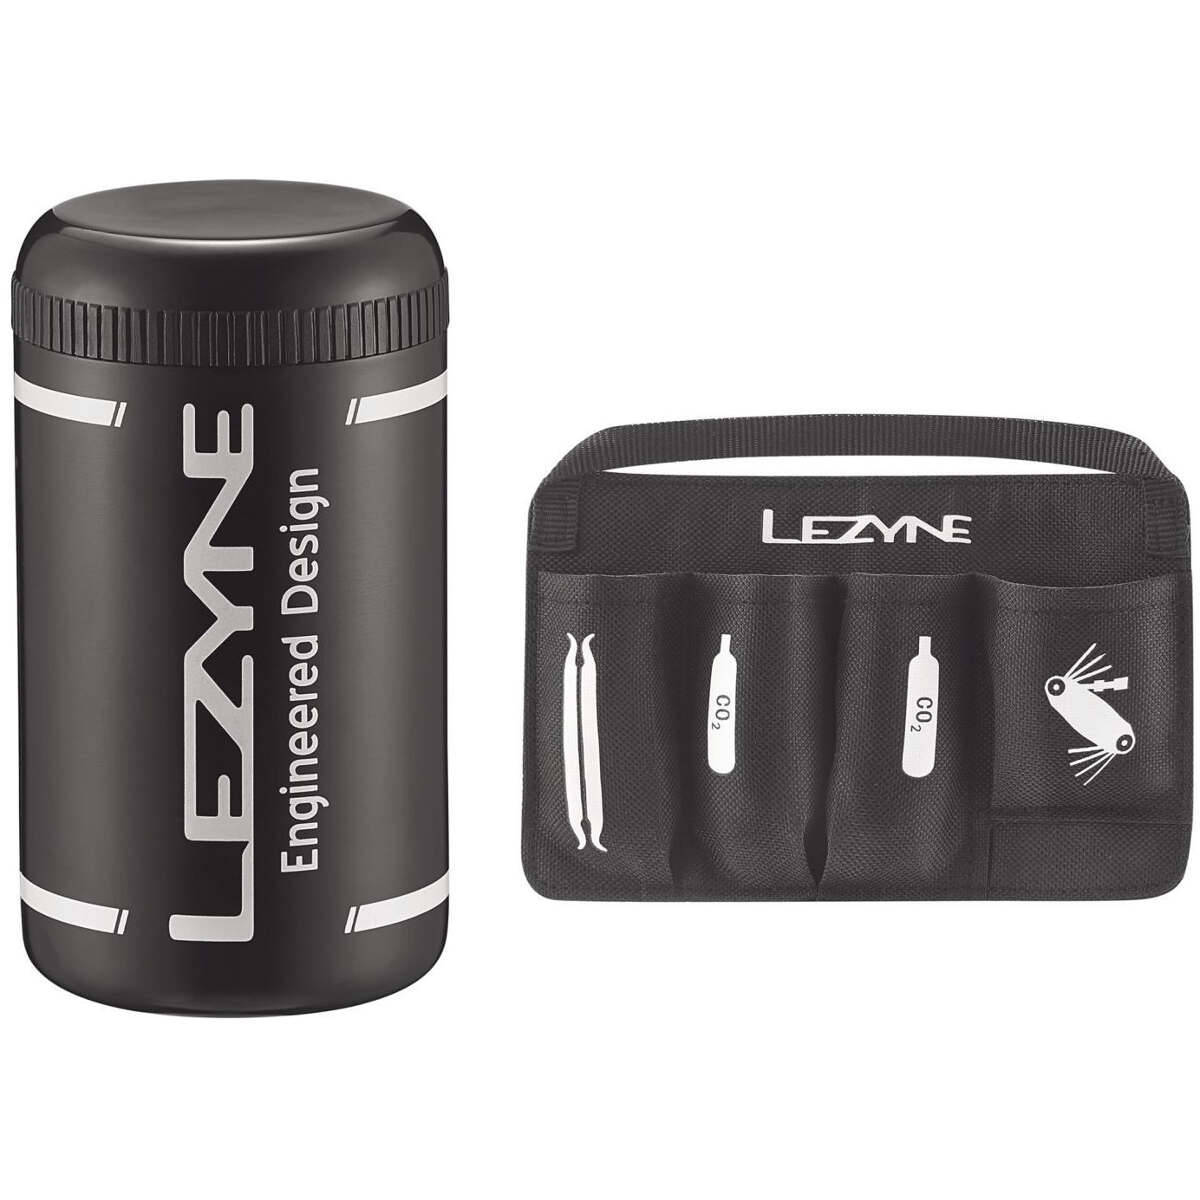 Lezyne Tool Can Flow Caddy with Organizer